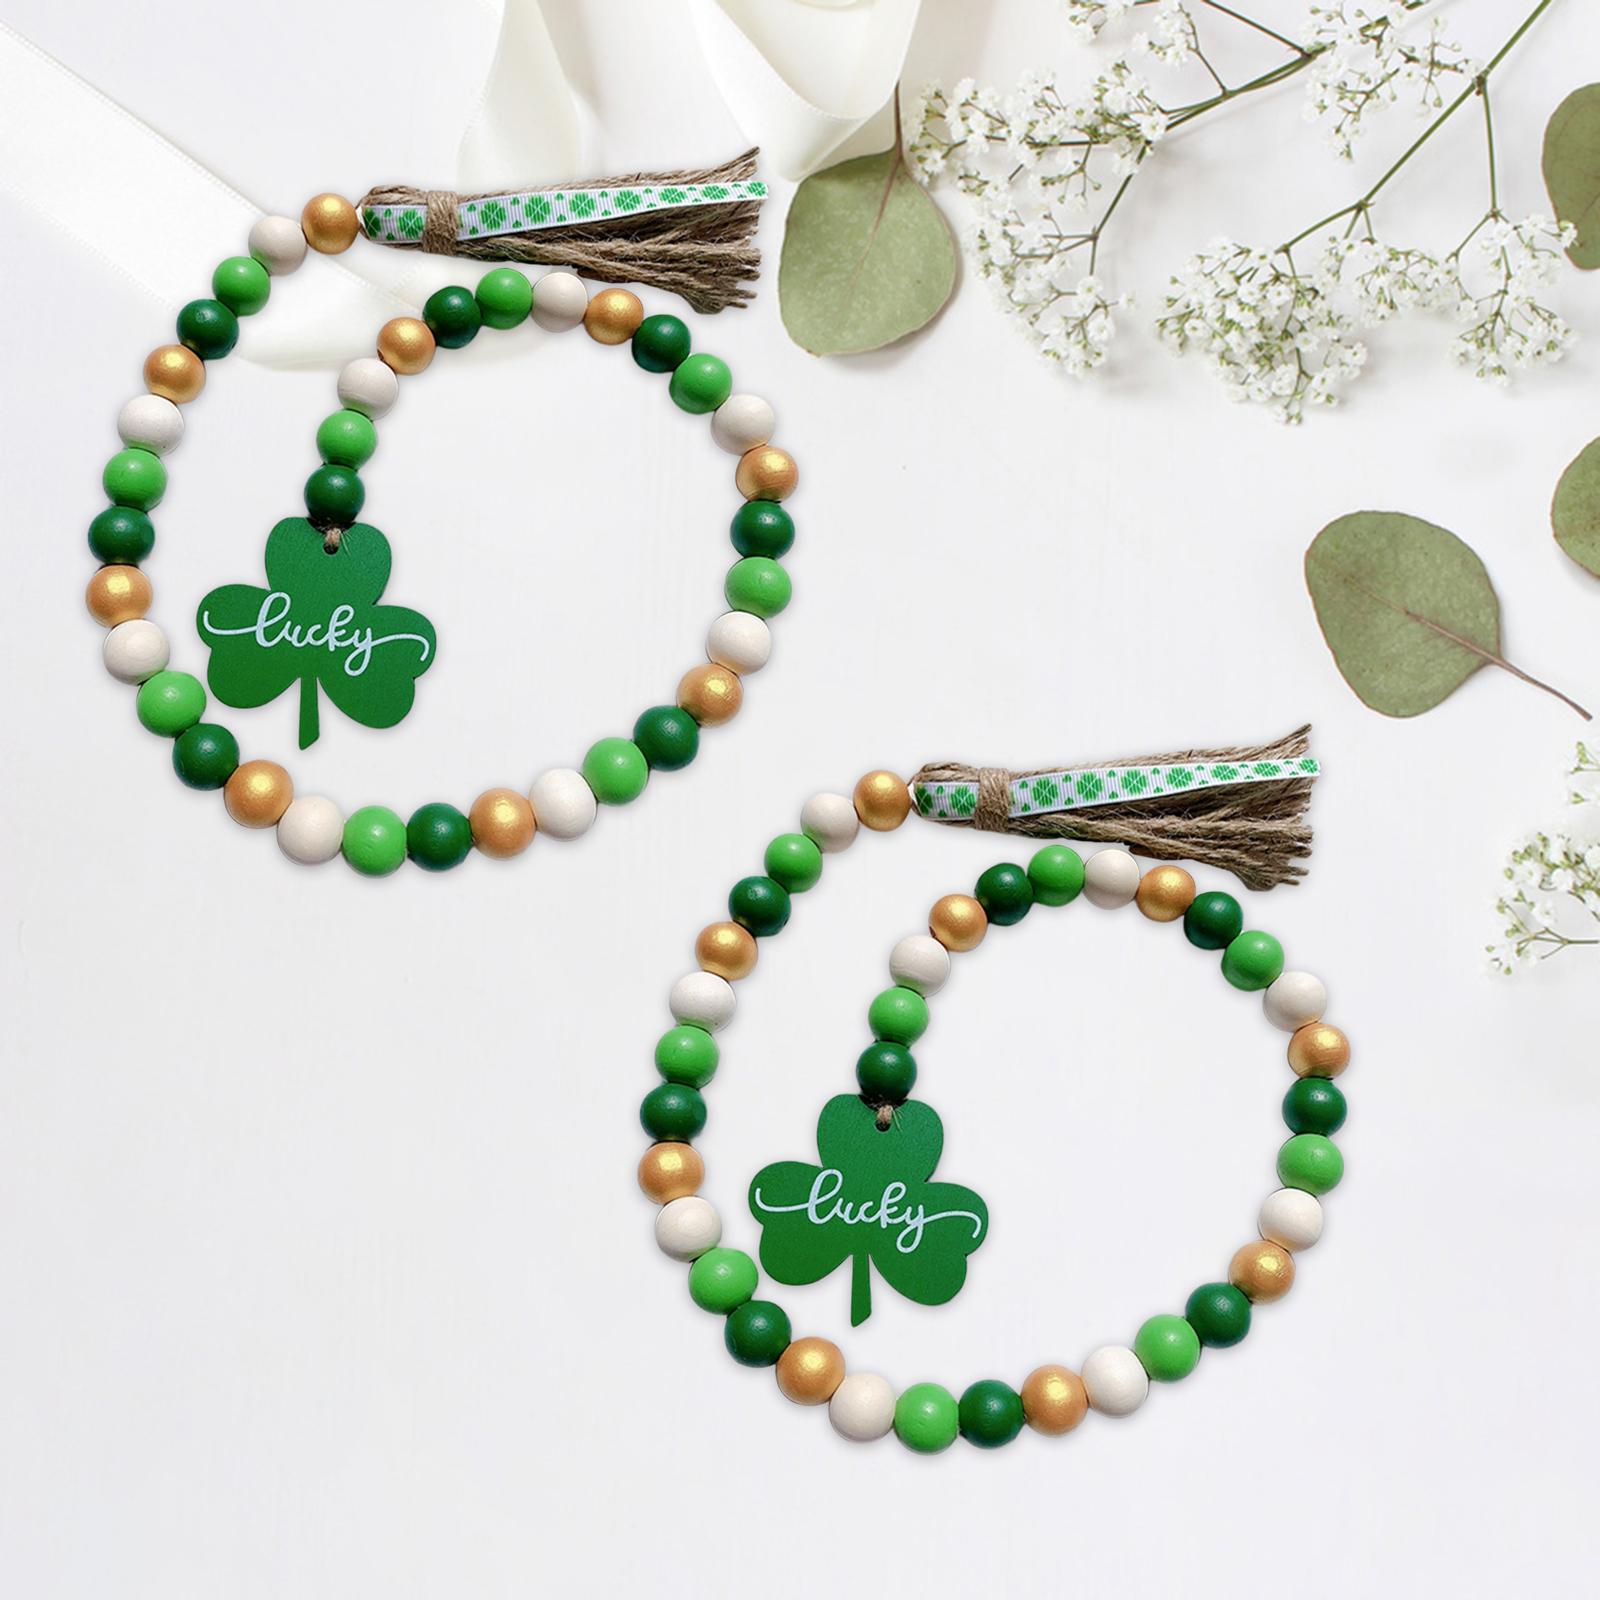 2x Wood Bead Garland with Tassels Natural Wooden Embellishments Wall Hanging Green White Gold